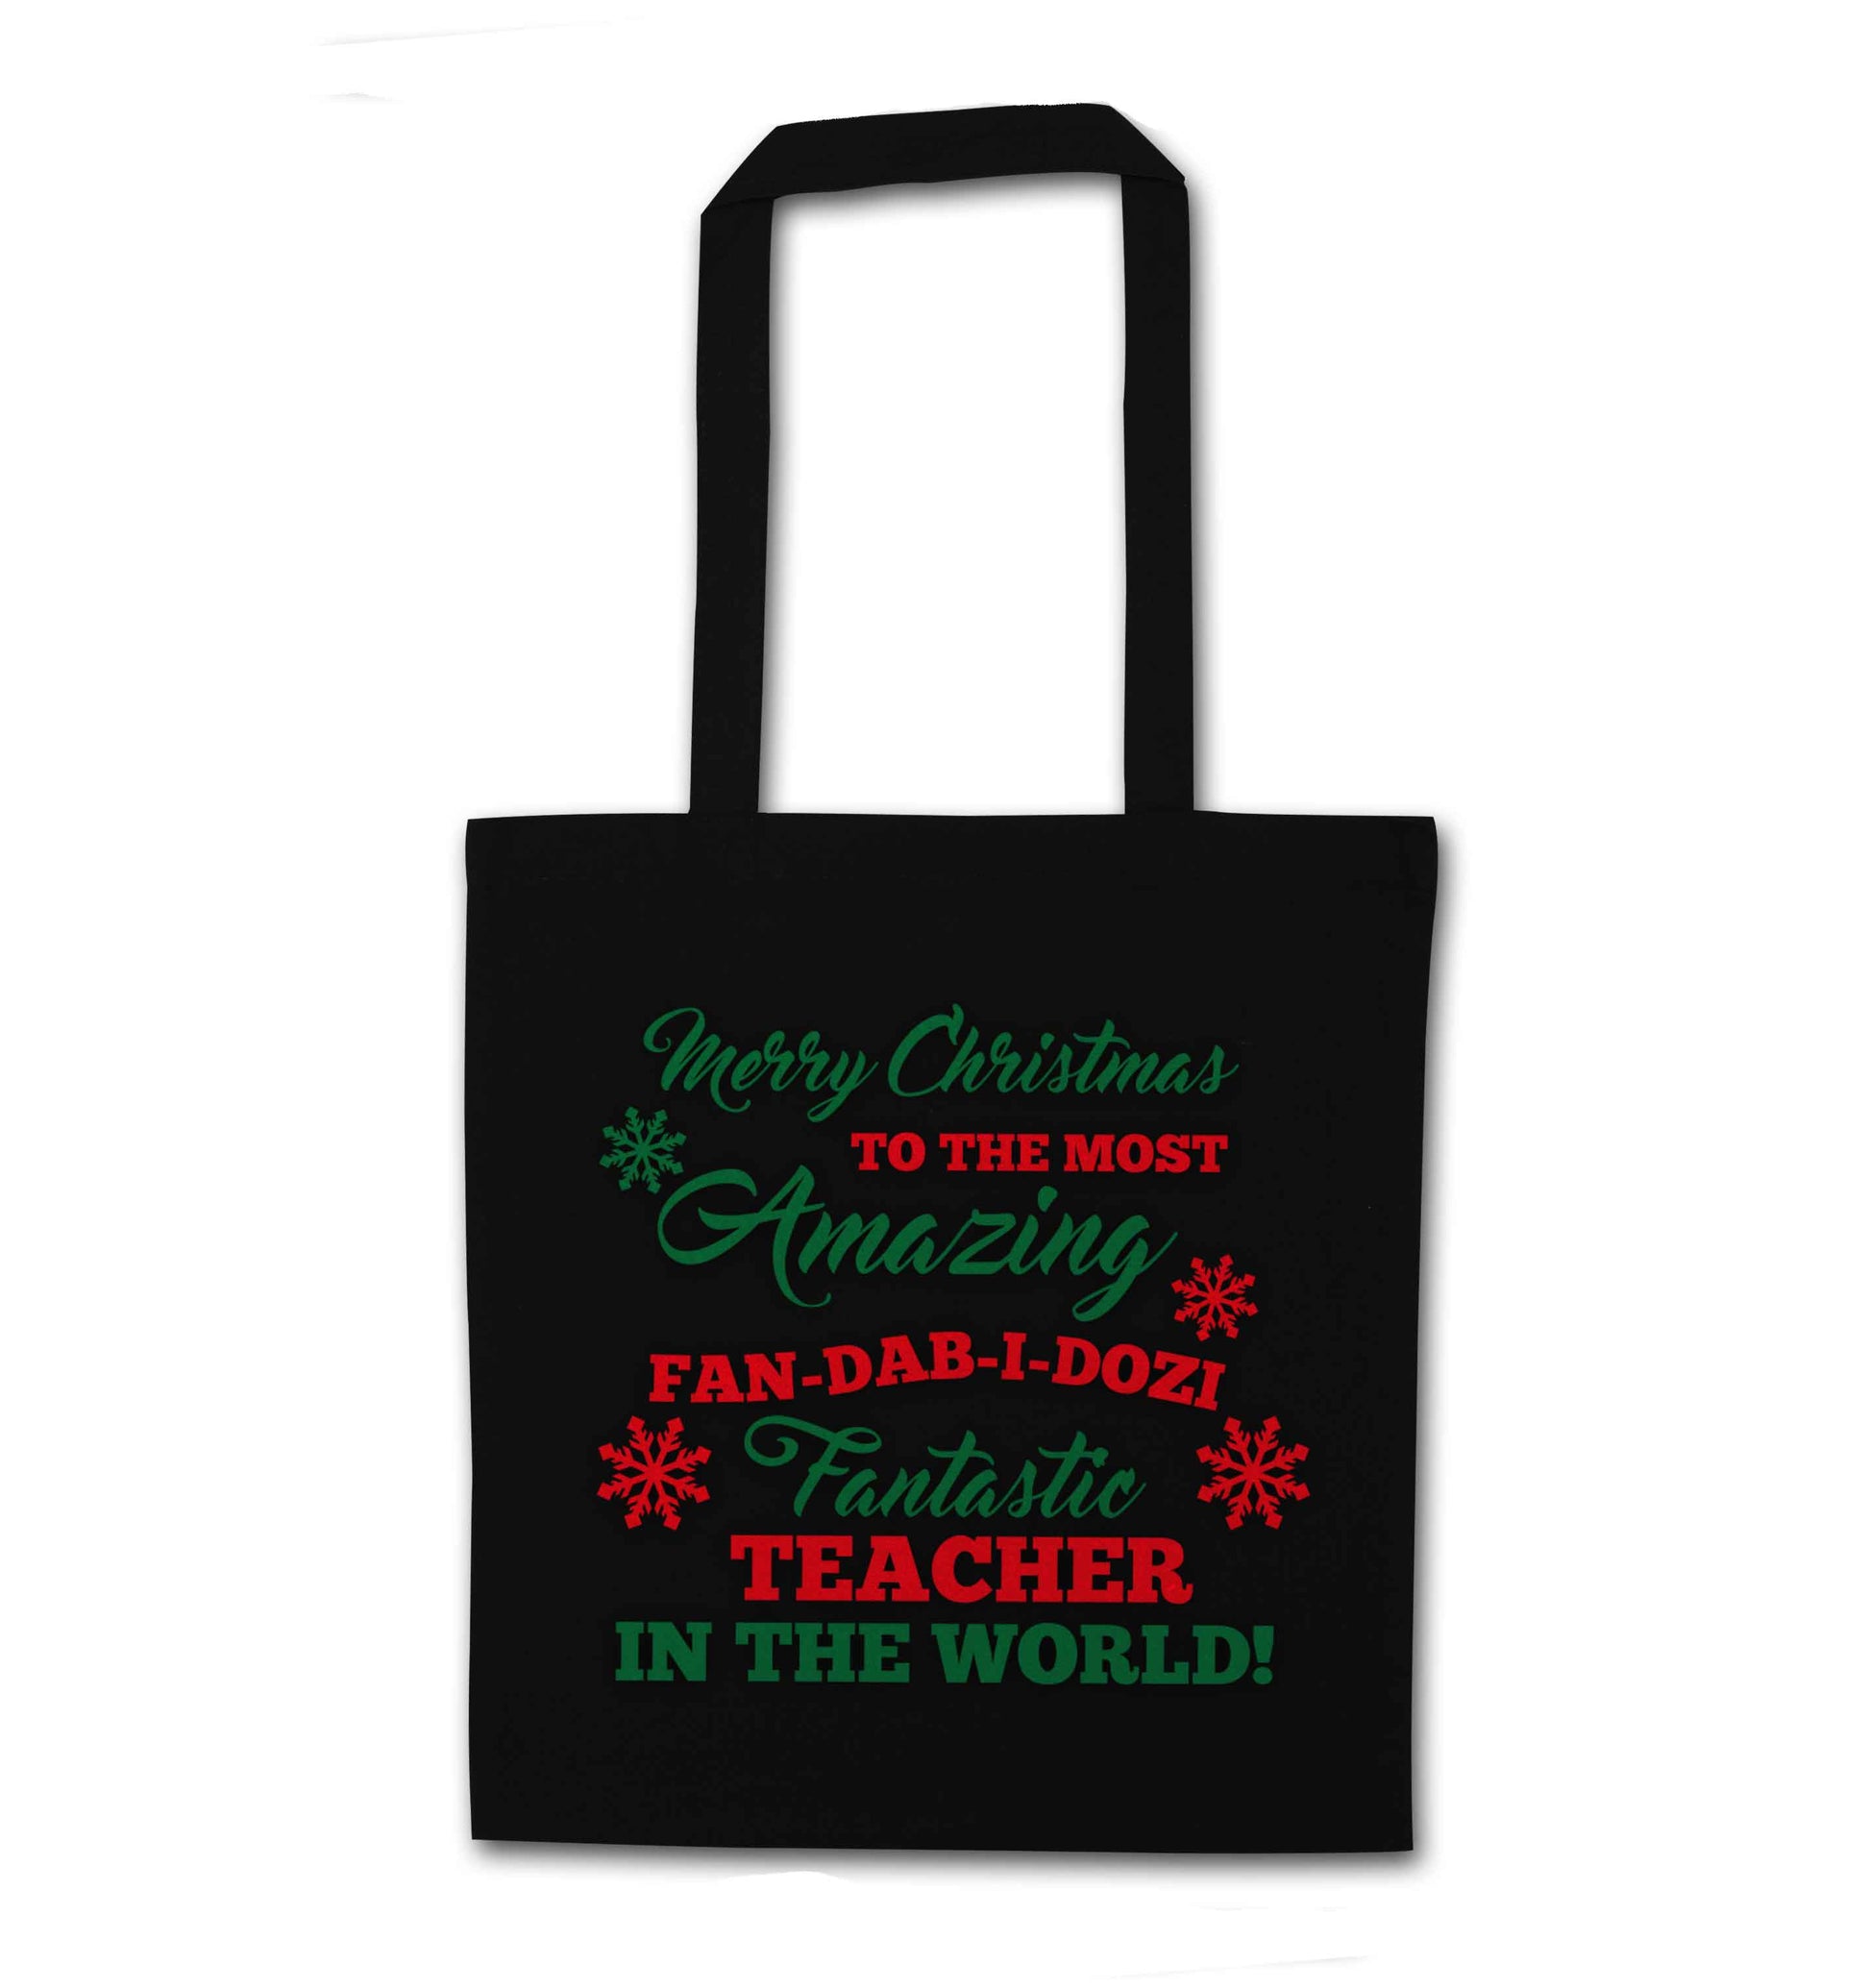 Merry Christmas to the most amazing fan-dab-i-dozi fantasic teacher in the world black tote bag